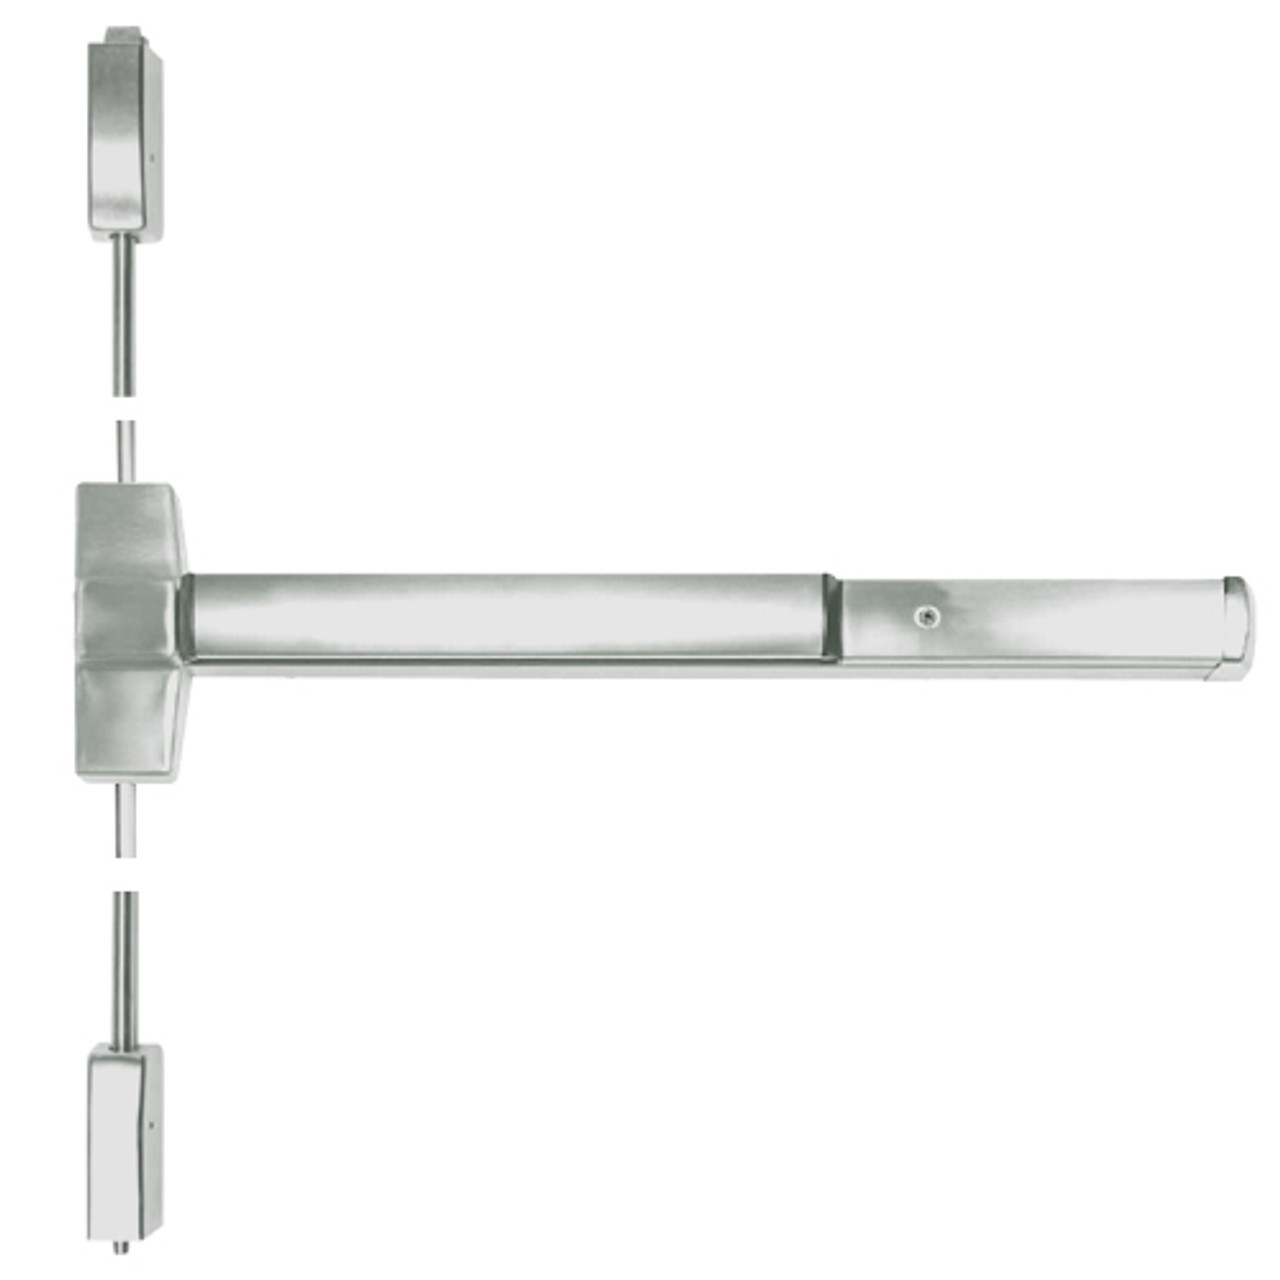 ED5470-619-W048-MELR Corbin ED5400 Series Non Fire Rated Vertical Rod Exit Device with Motor Latch Retraction in Satin Nickel Finish